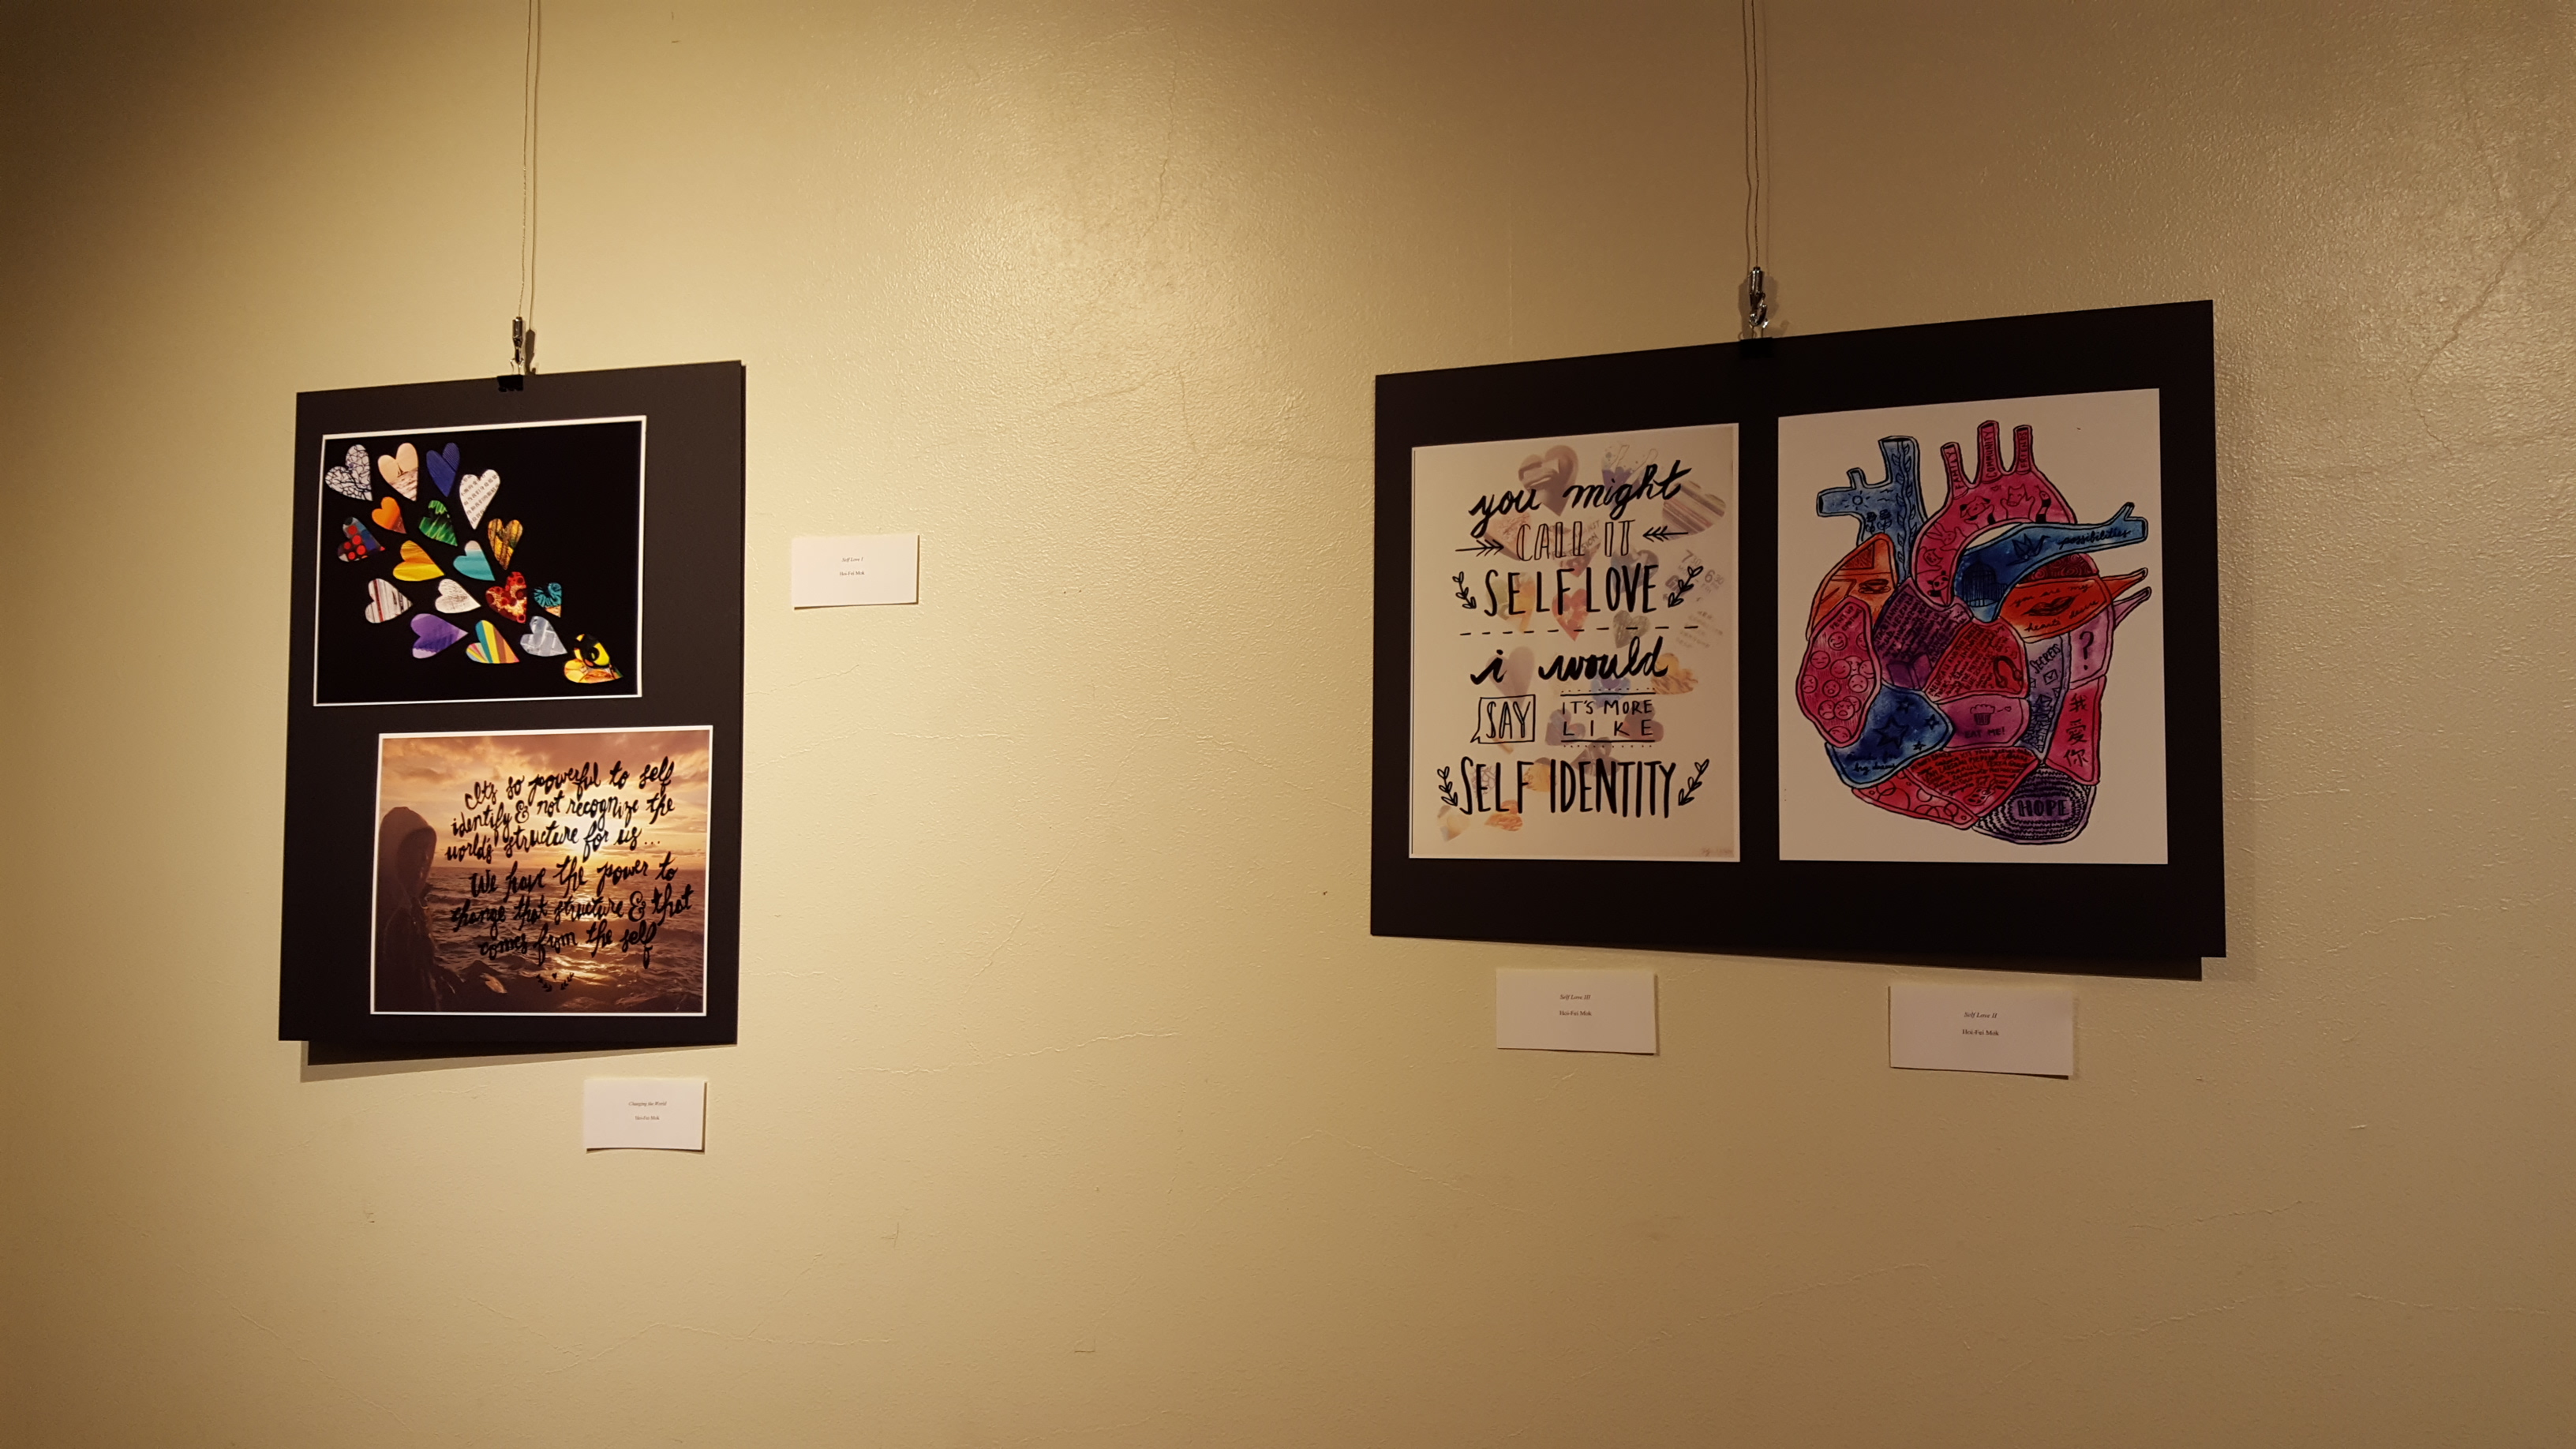 Image Description: Artwork from the Artist Collective Exhibit hangs on the wall. Four prints are arranged on two black backgrounds. 